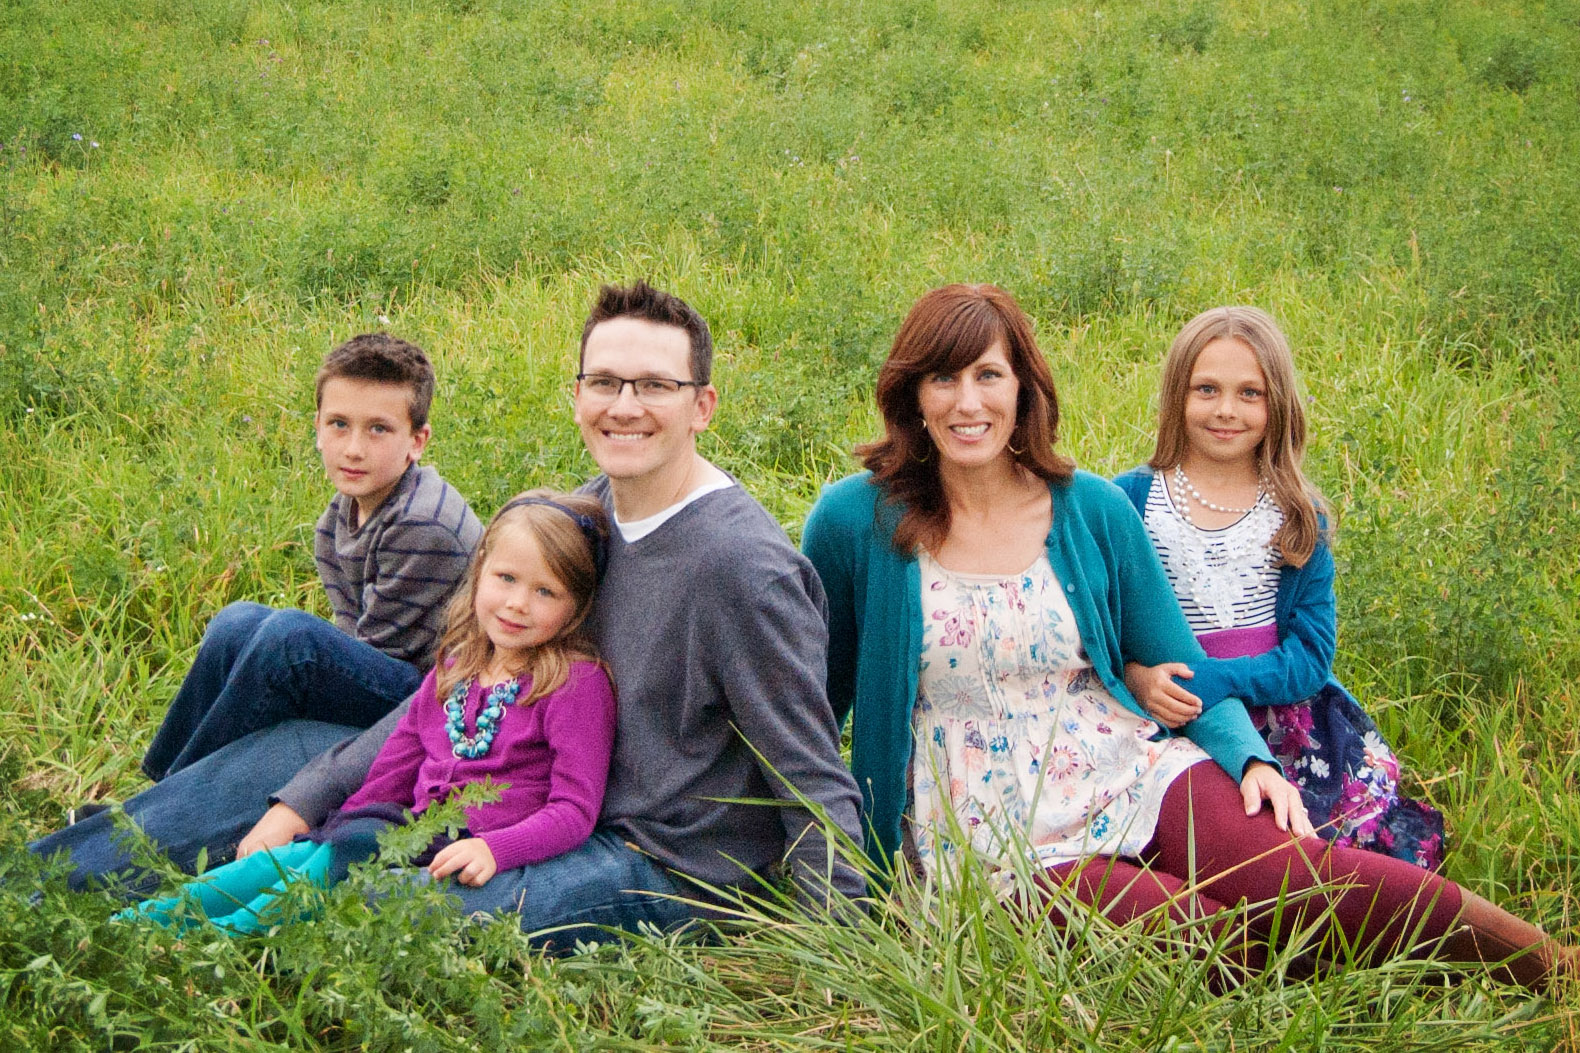 6 Tips For Taking Your Own Family Photos